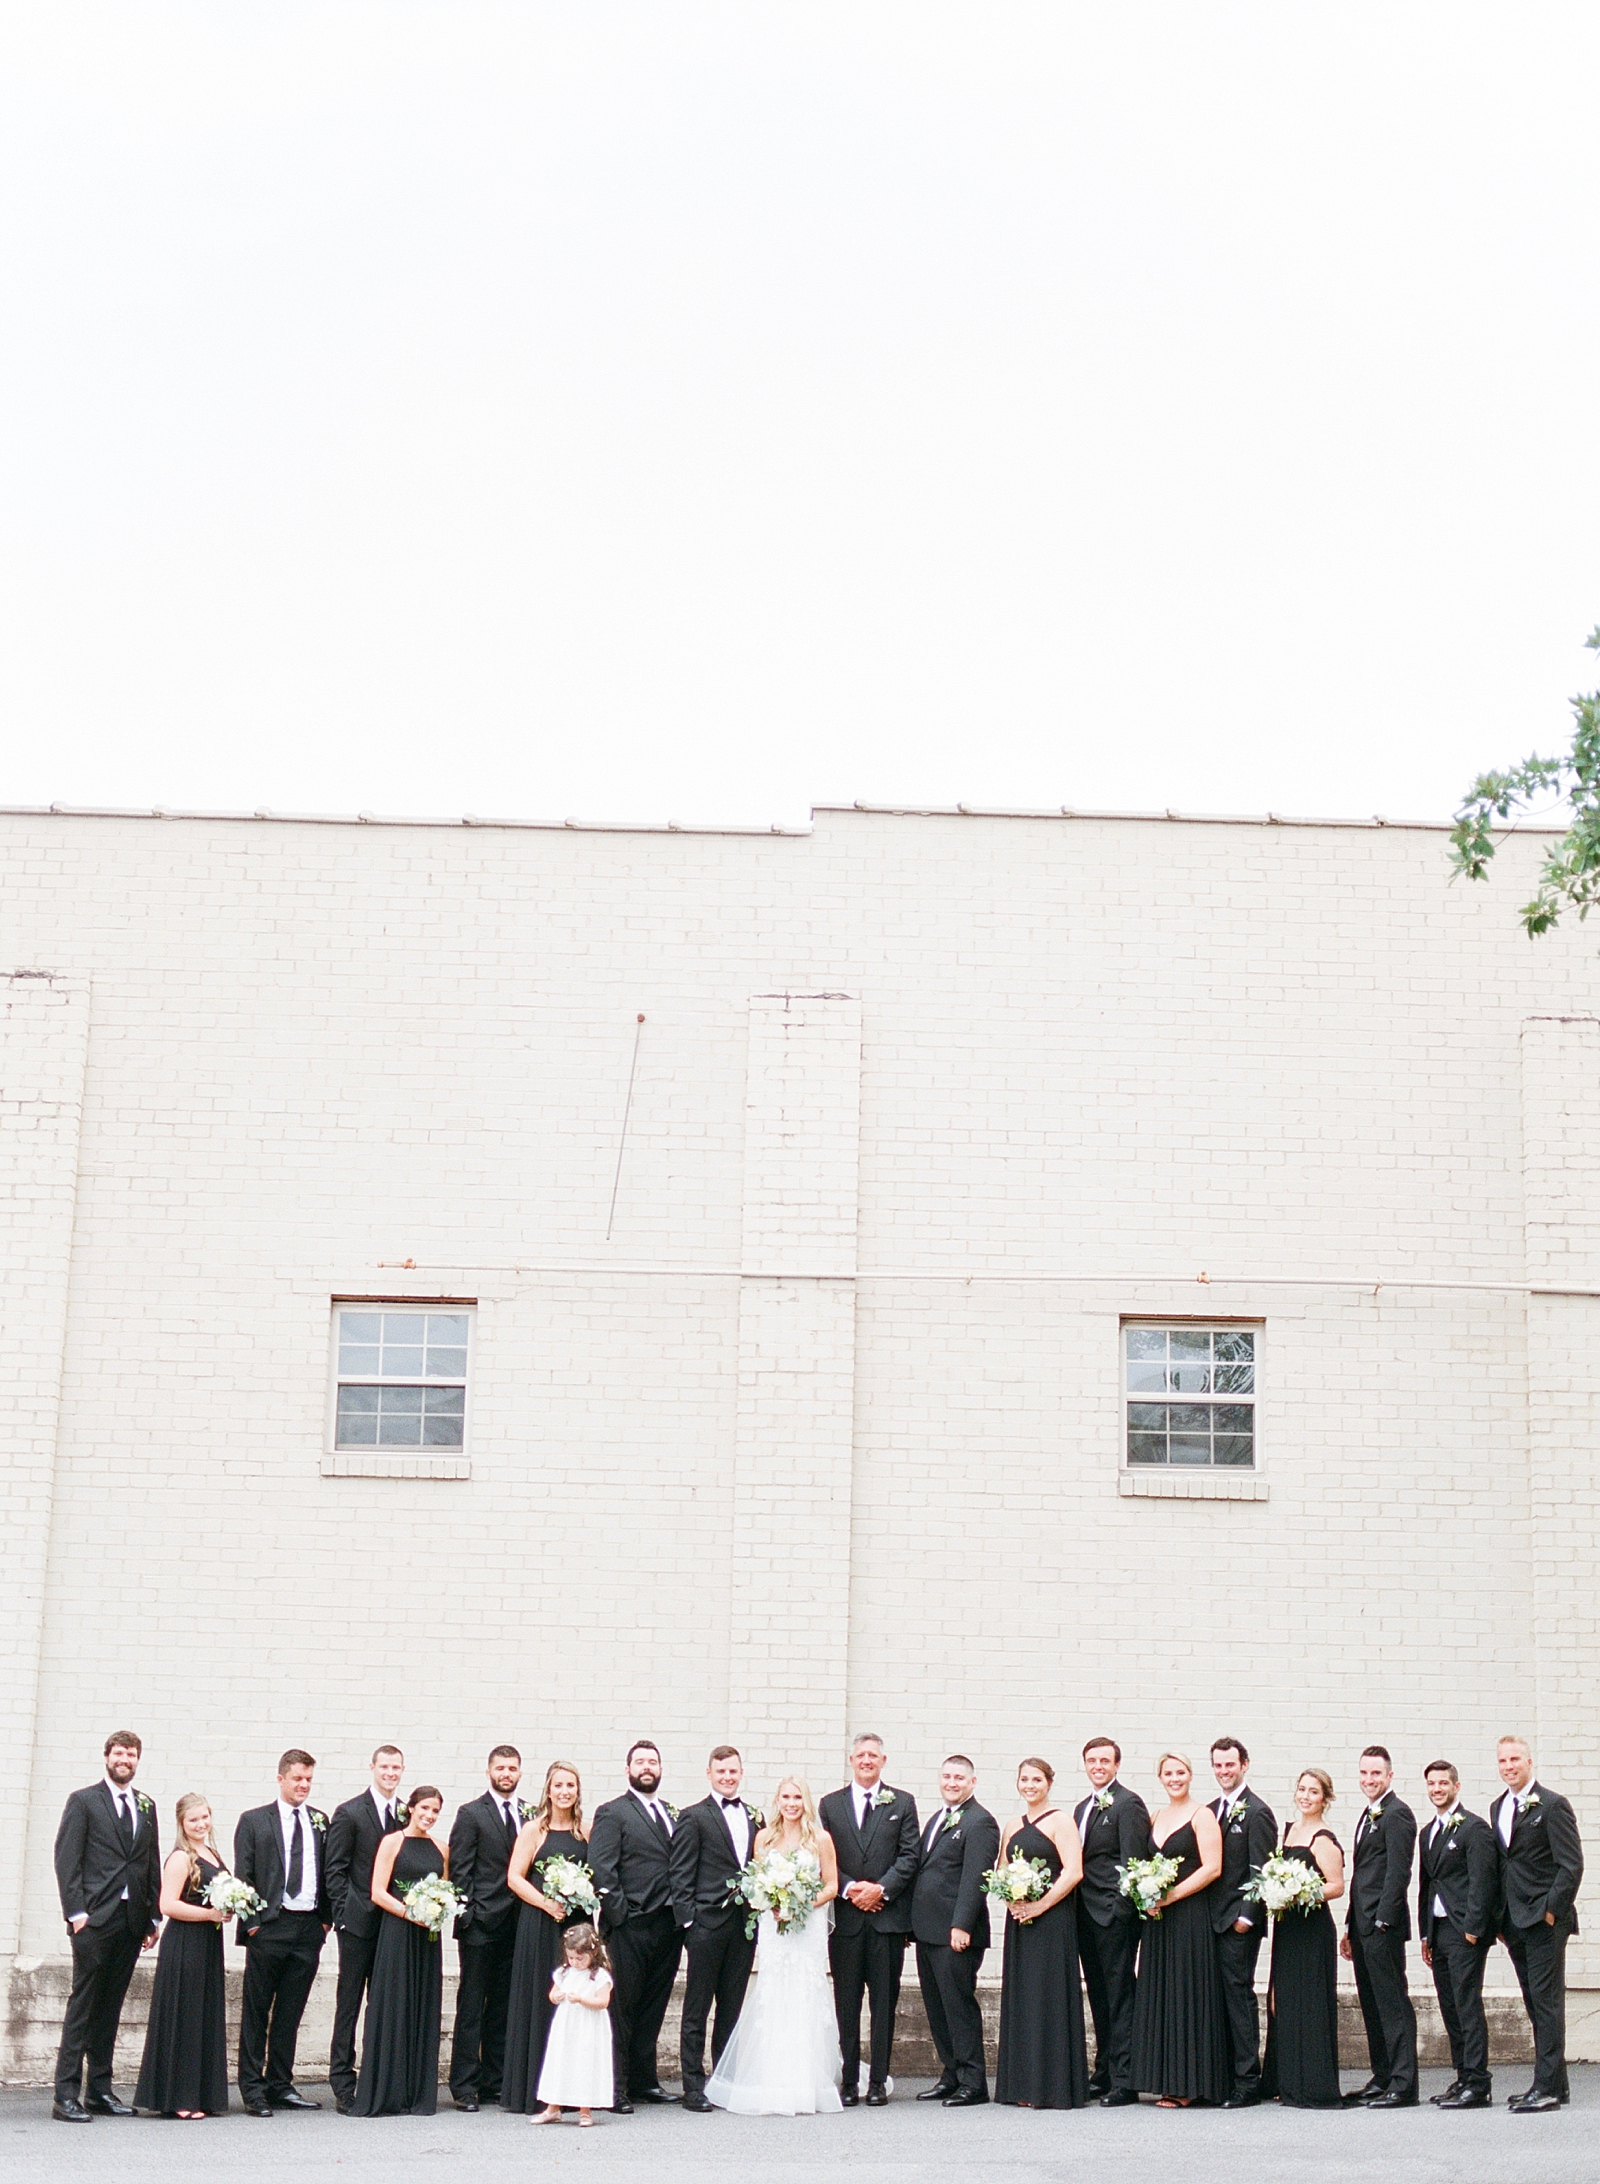 Glover Park Brewery Wedding Bridal Party Photo